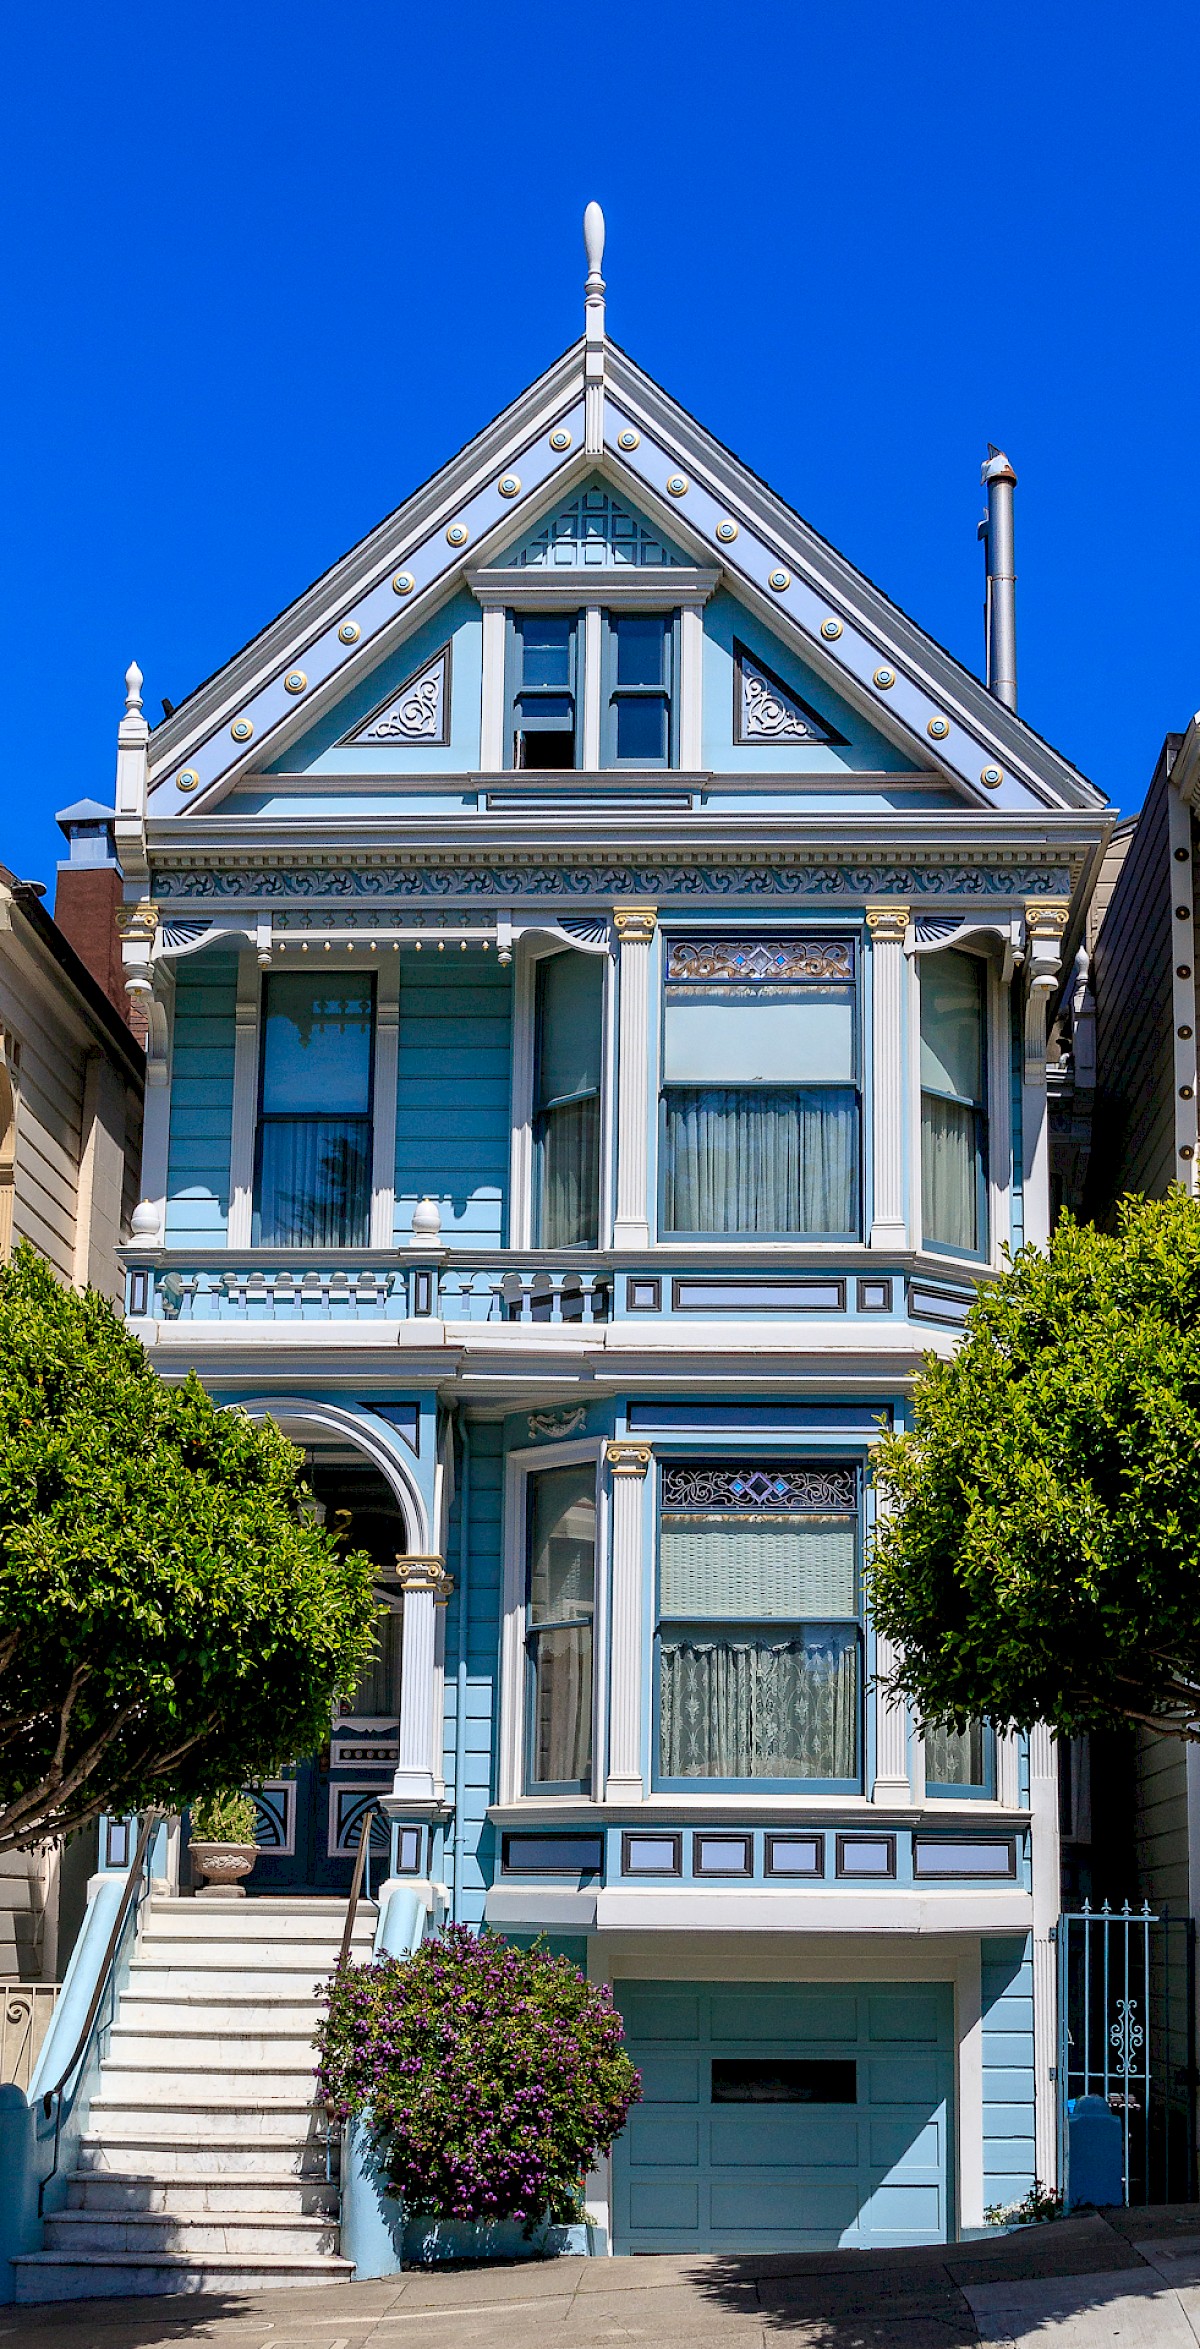 Painted Ladies, additional view